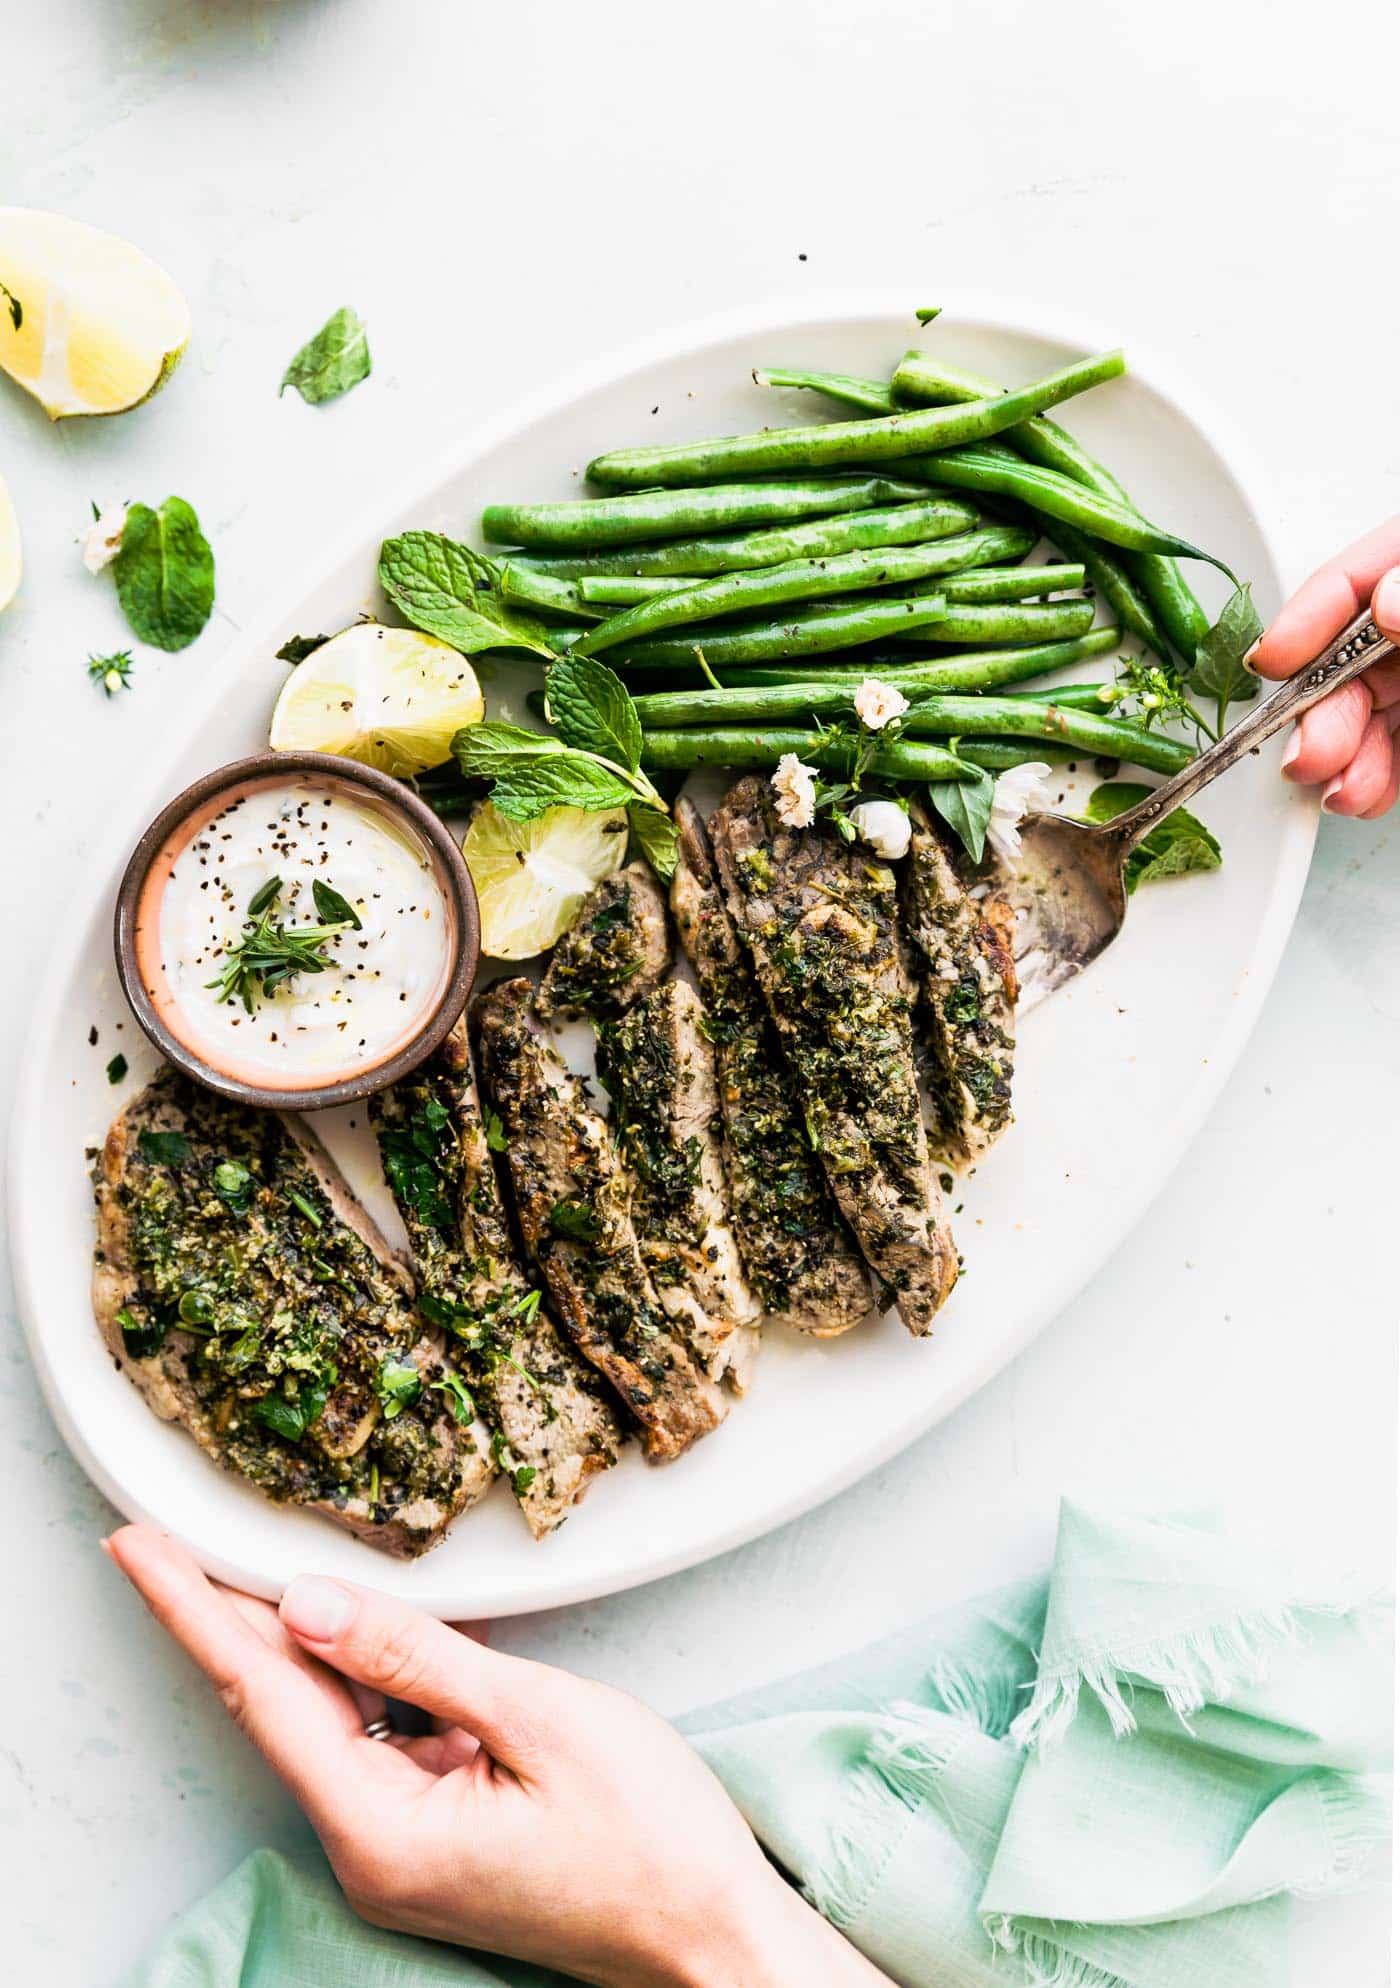 a white serving platter filled with broiled lamb chops with mint chimichurri sauce, green beans, a halved lime, and a white yogurt dipping sauce with a woman's hand holding the platter and another hand holidng a fork underneath a lamb chop